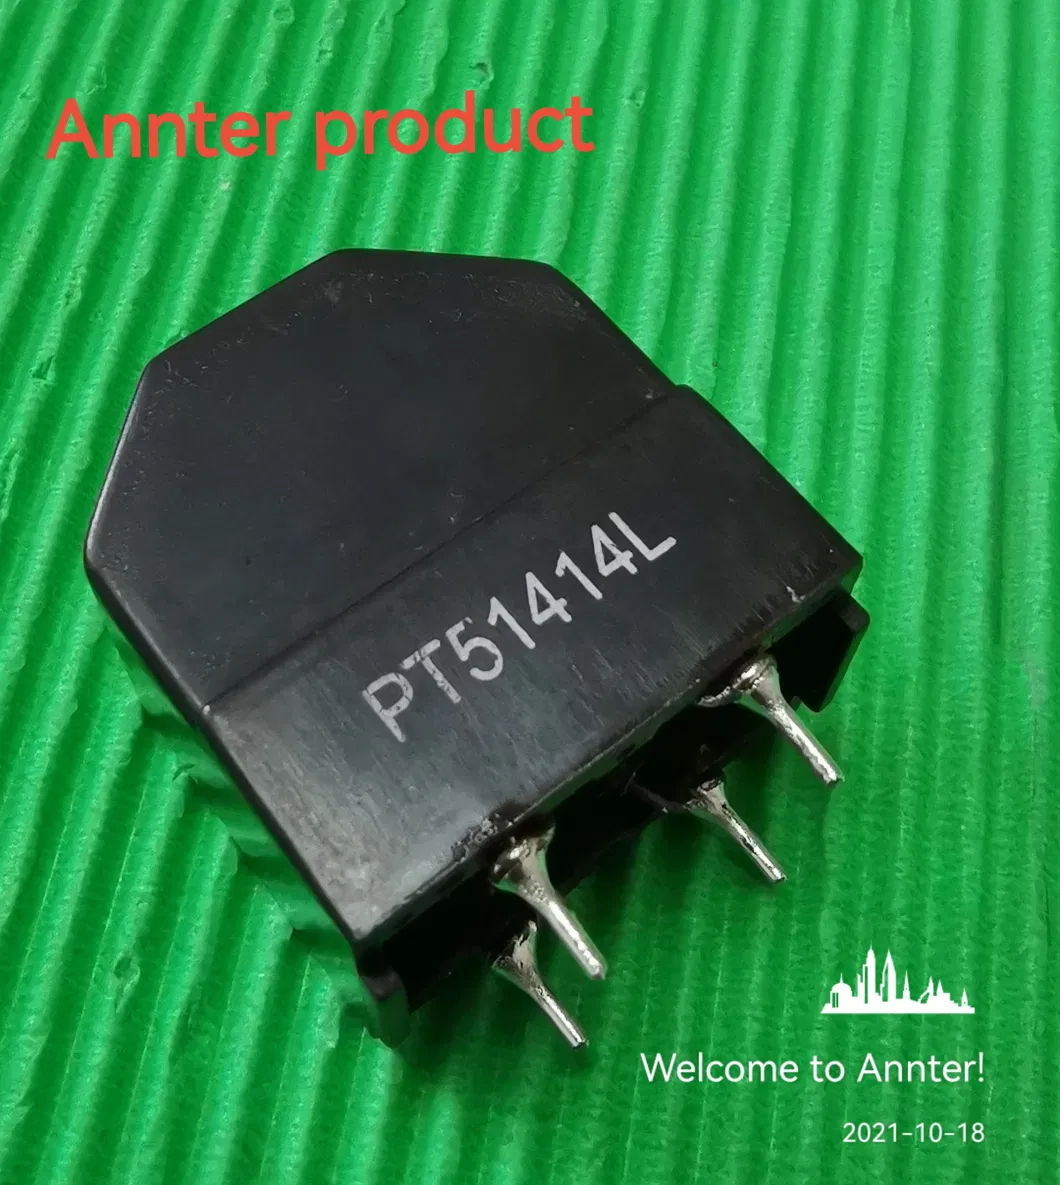 Inductor Coil for EMI Filter, Common Mode Choke with Shield for Home Appliance, Ferrite Core 4.1mh 3.2A